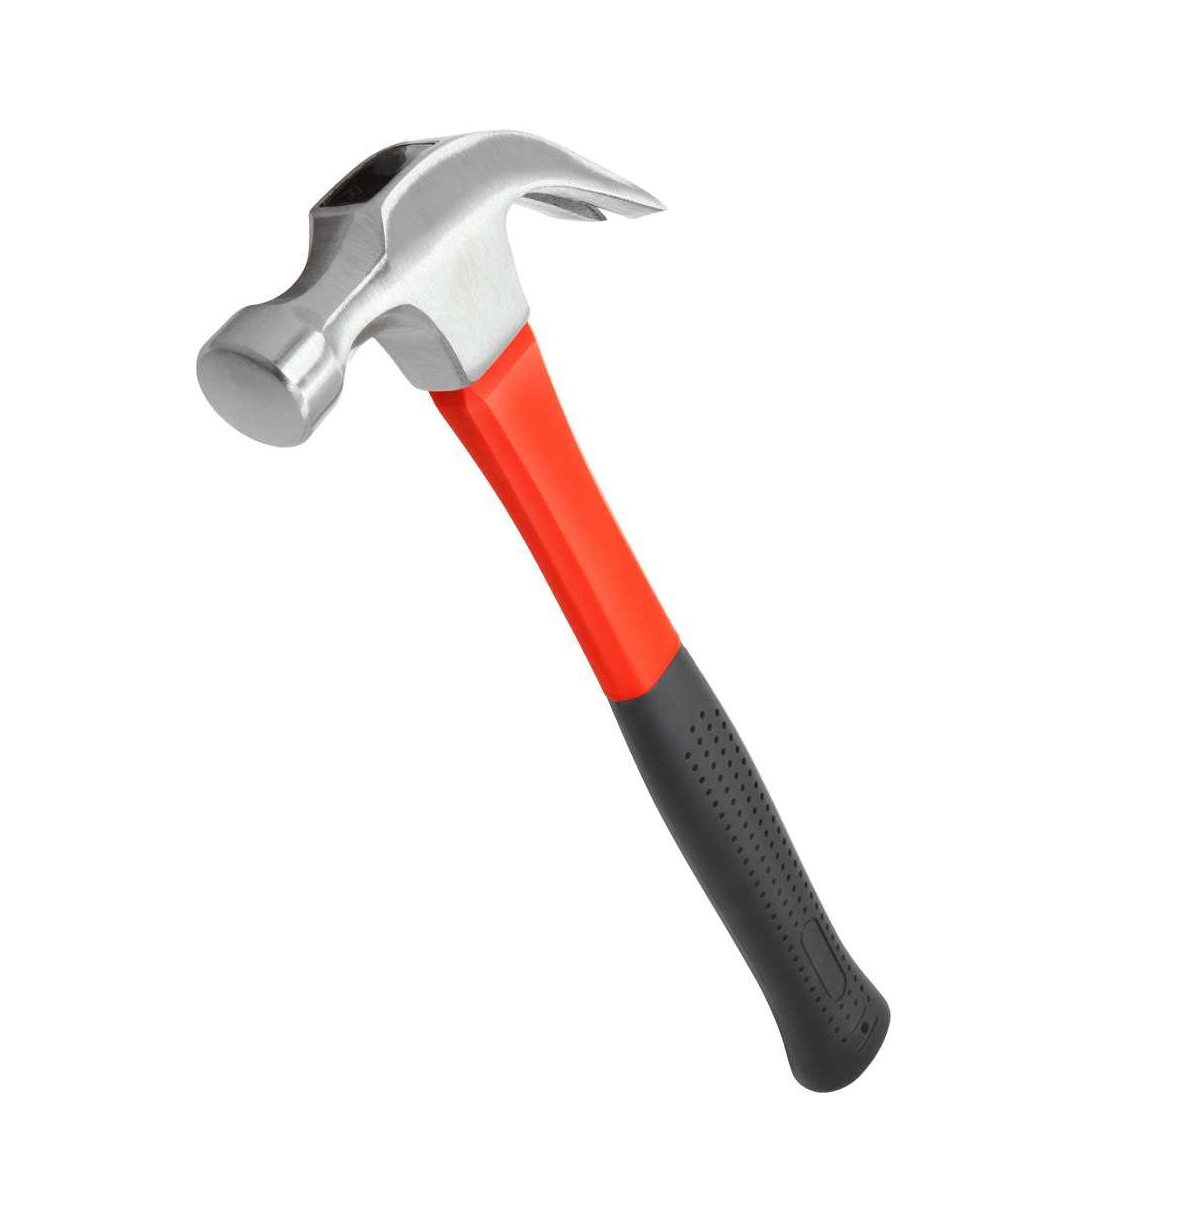 16 Ounce Claw Hammer with Nail Puller and Comfort Grip - Red